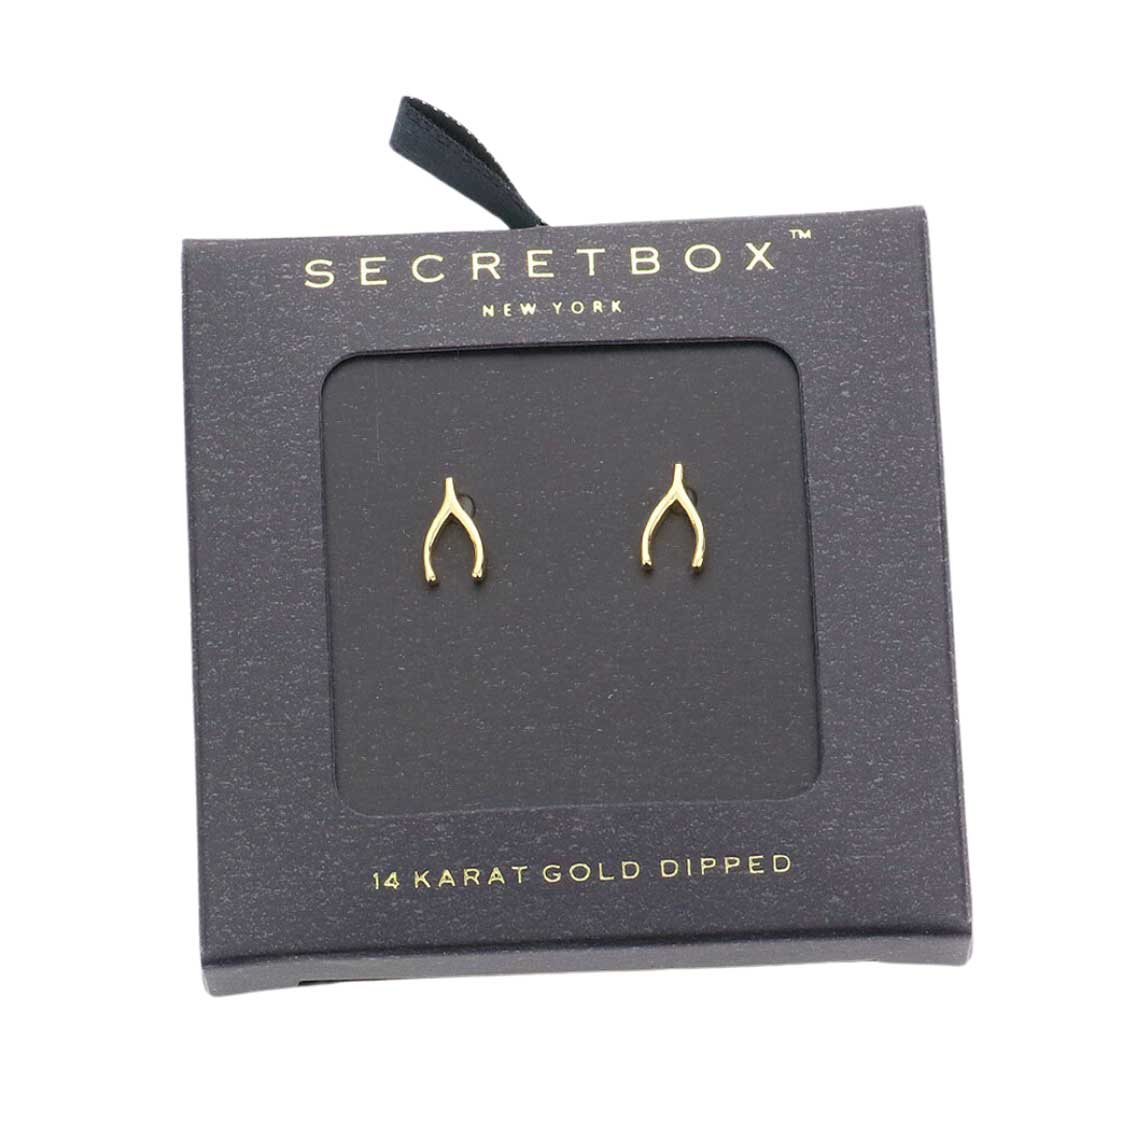 Gold Secret Box 14K Gold Dipped Wishbone Stud Earrings. The beautifully crafted design adds a gorgeous glow to any outfit. Jewelry that fits your lifestyle adding extra luxe! Perfect Birthday Gift, Anniversary Gift, Mother's Day Gift, Anniversary Gift, Graduation Gift, Prom Jewelry, Just Because Gift, Thank You Gift.